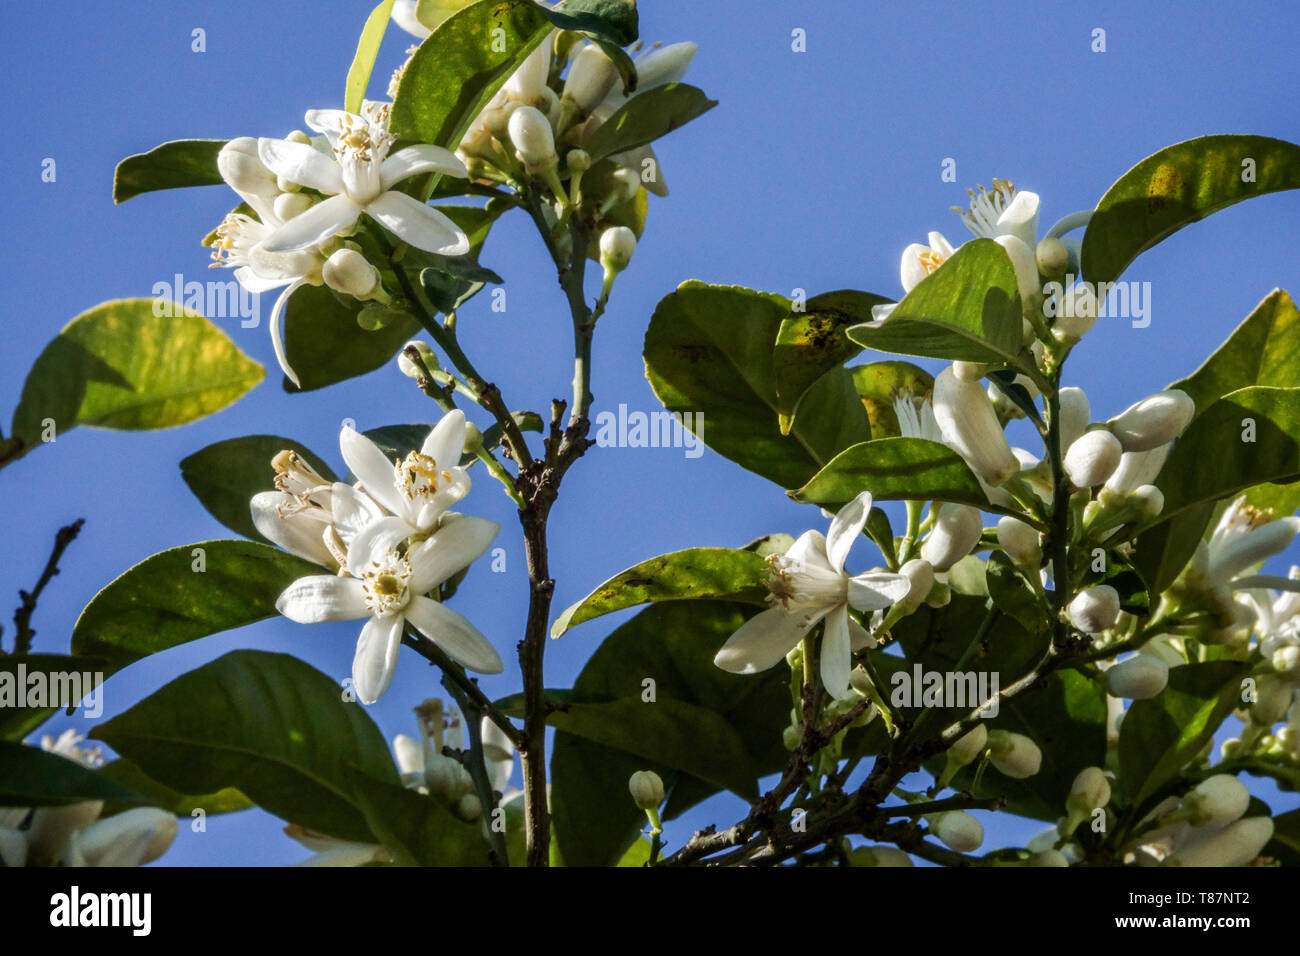 White Blossoms Orange Tree Blossoming Branches White Flowers Blooming Branch Flowering Orange Valencia Spain Europe Stock Photo